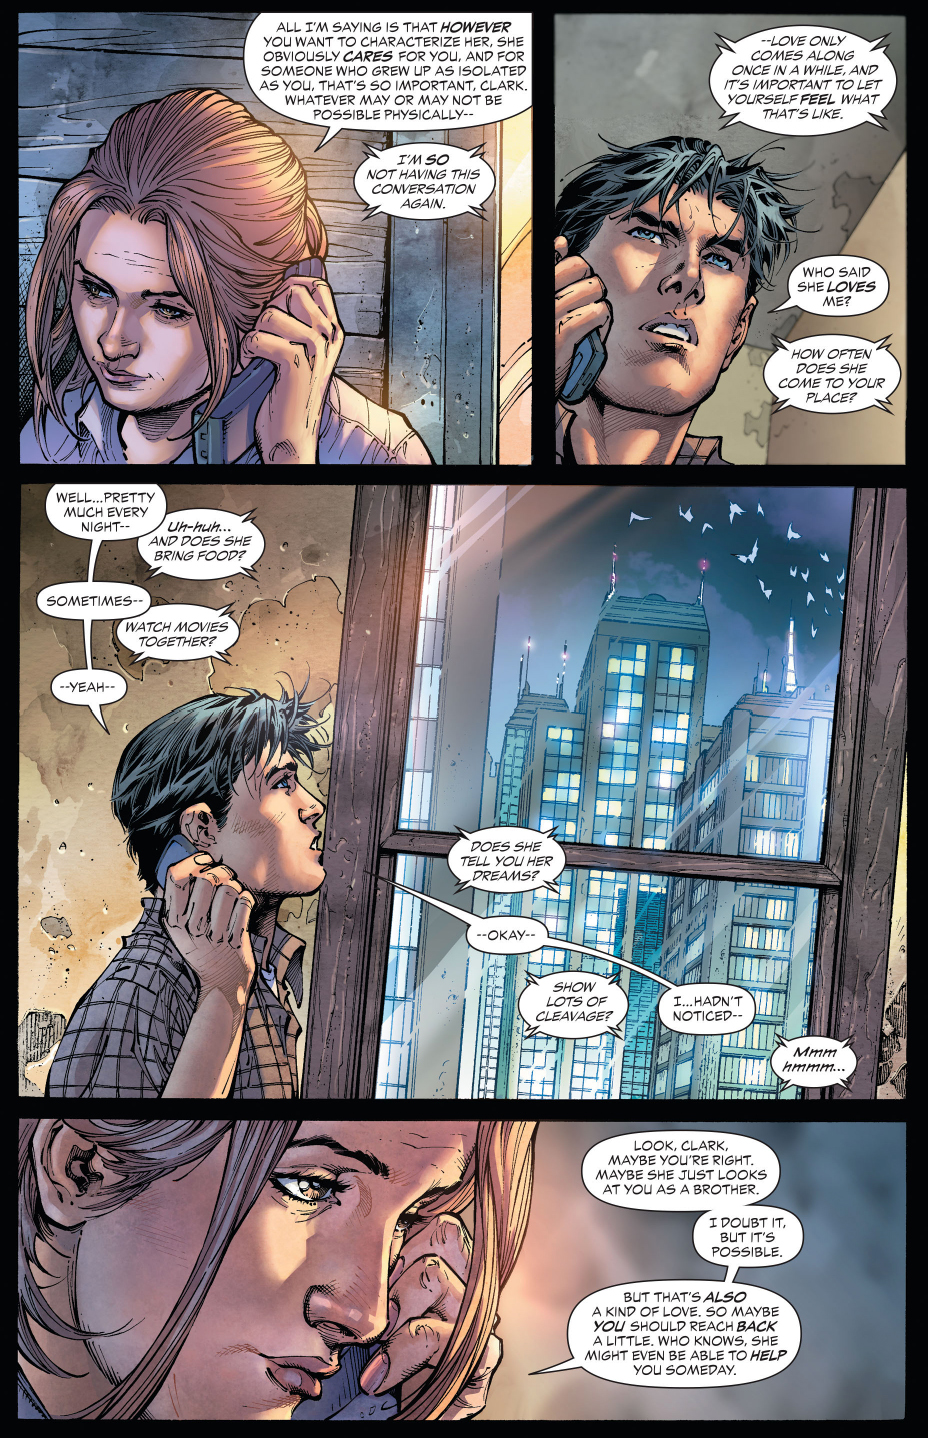 clark kent gets some motherly advice about girls